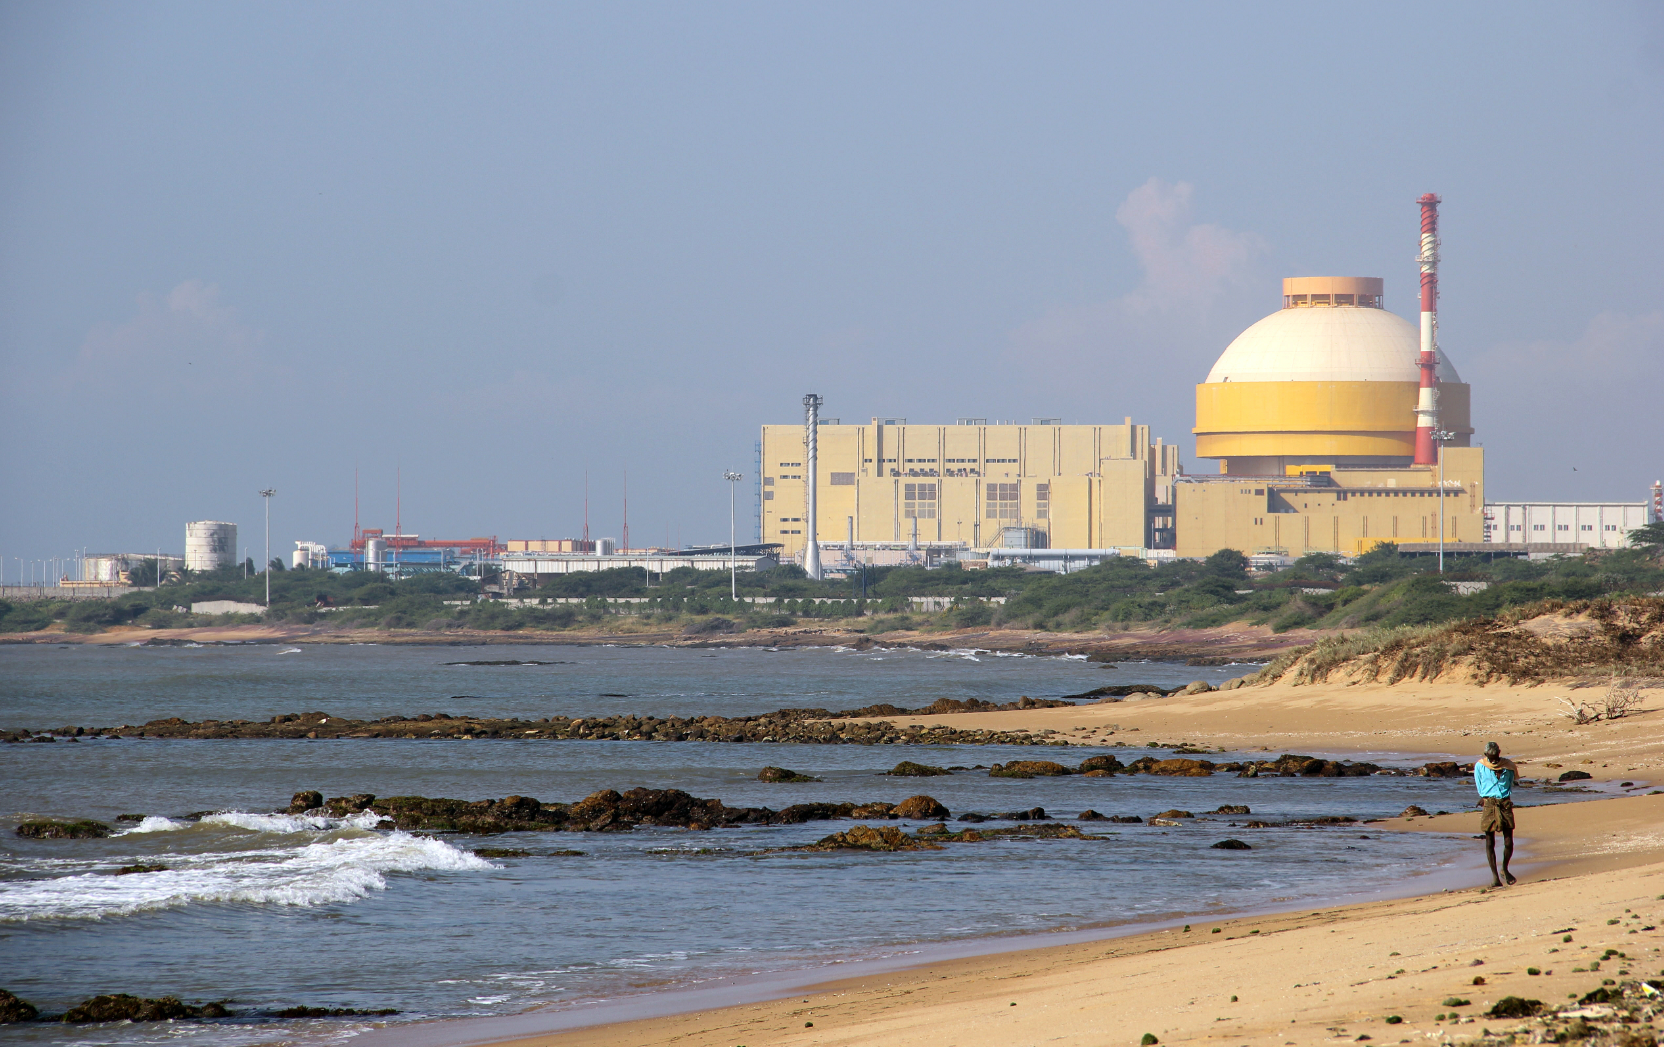 Kudankulam NPP is incorporating the largest power unit in the Indian Electricity System, as each reactor is producing 1000 MW. 